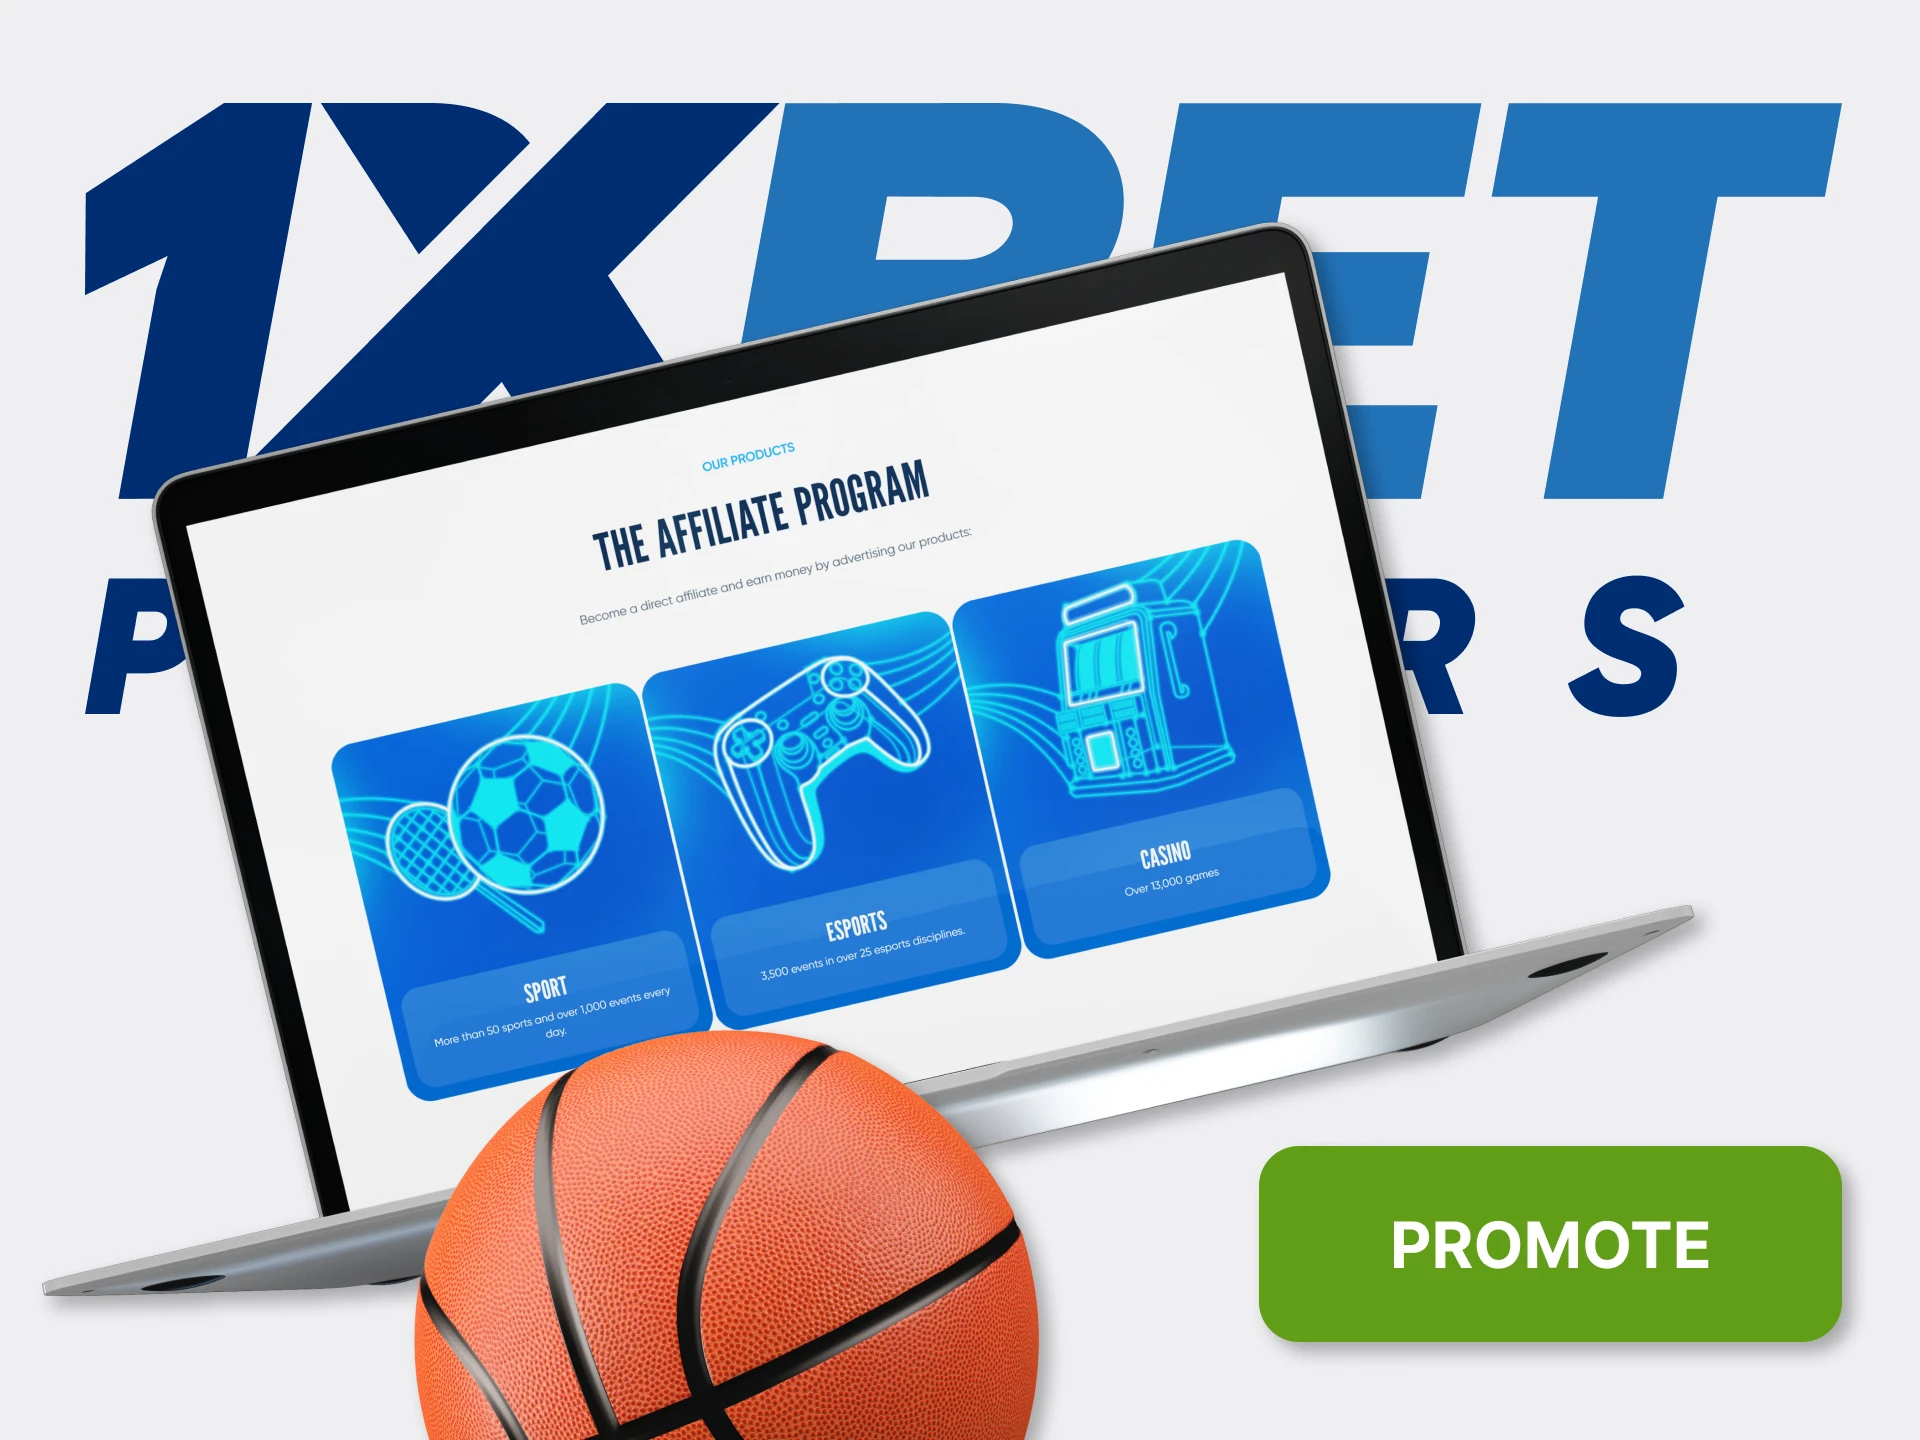 There are several ways you can promote 1xBet.